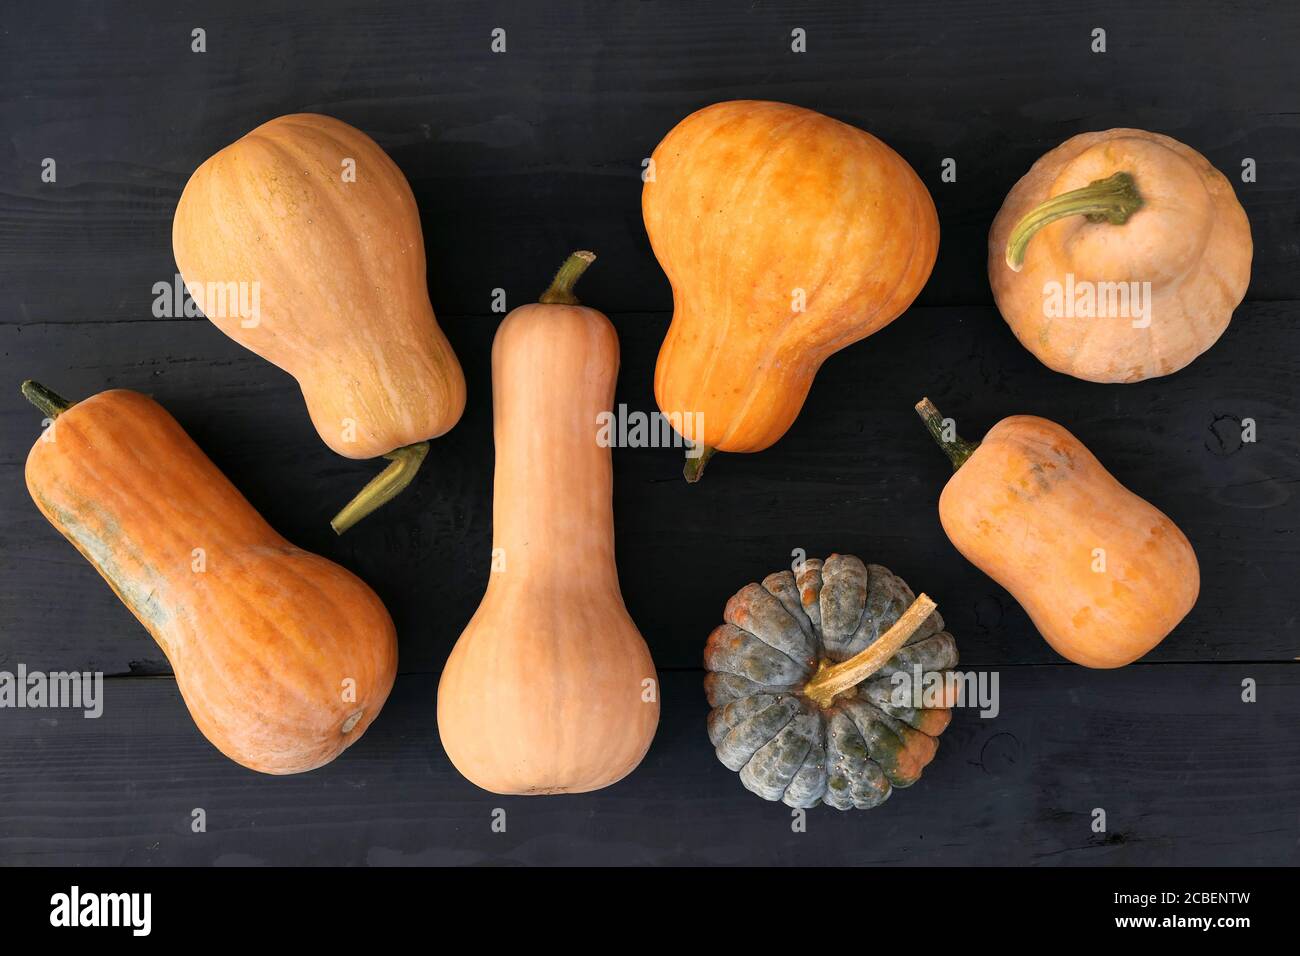 Butternut and moschata organic squashes varieties on black wooden board background. Stock Photo